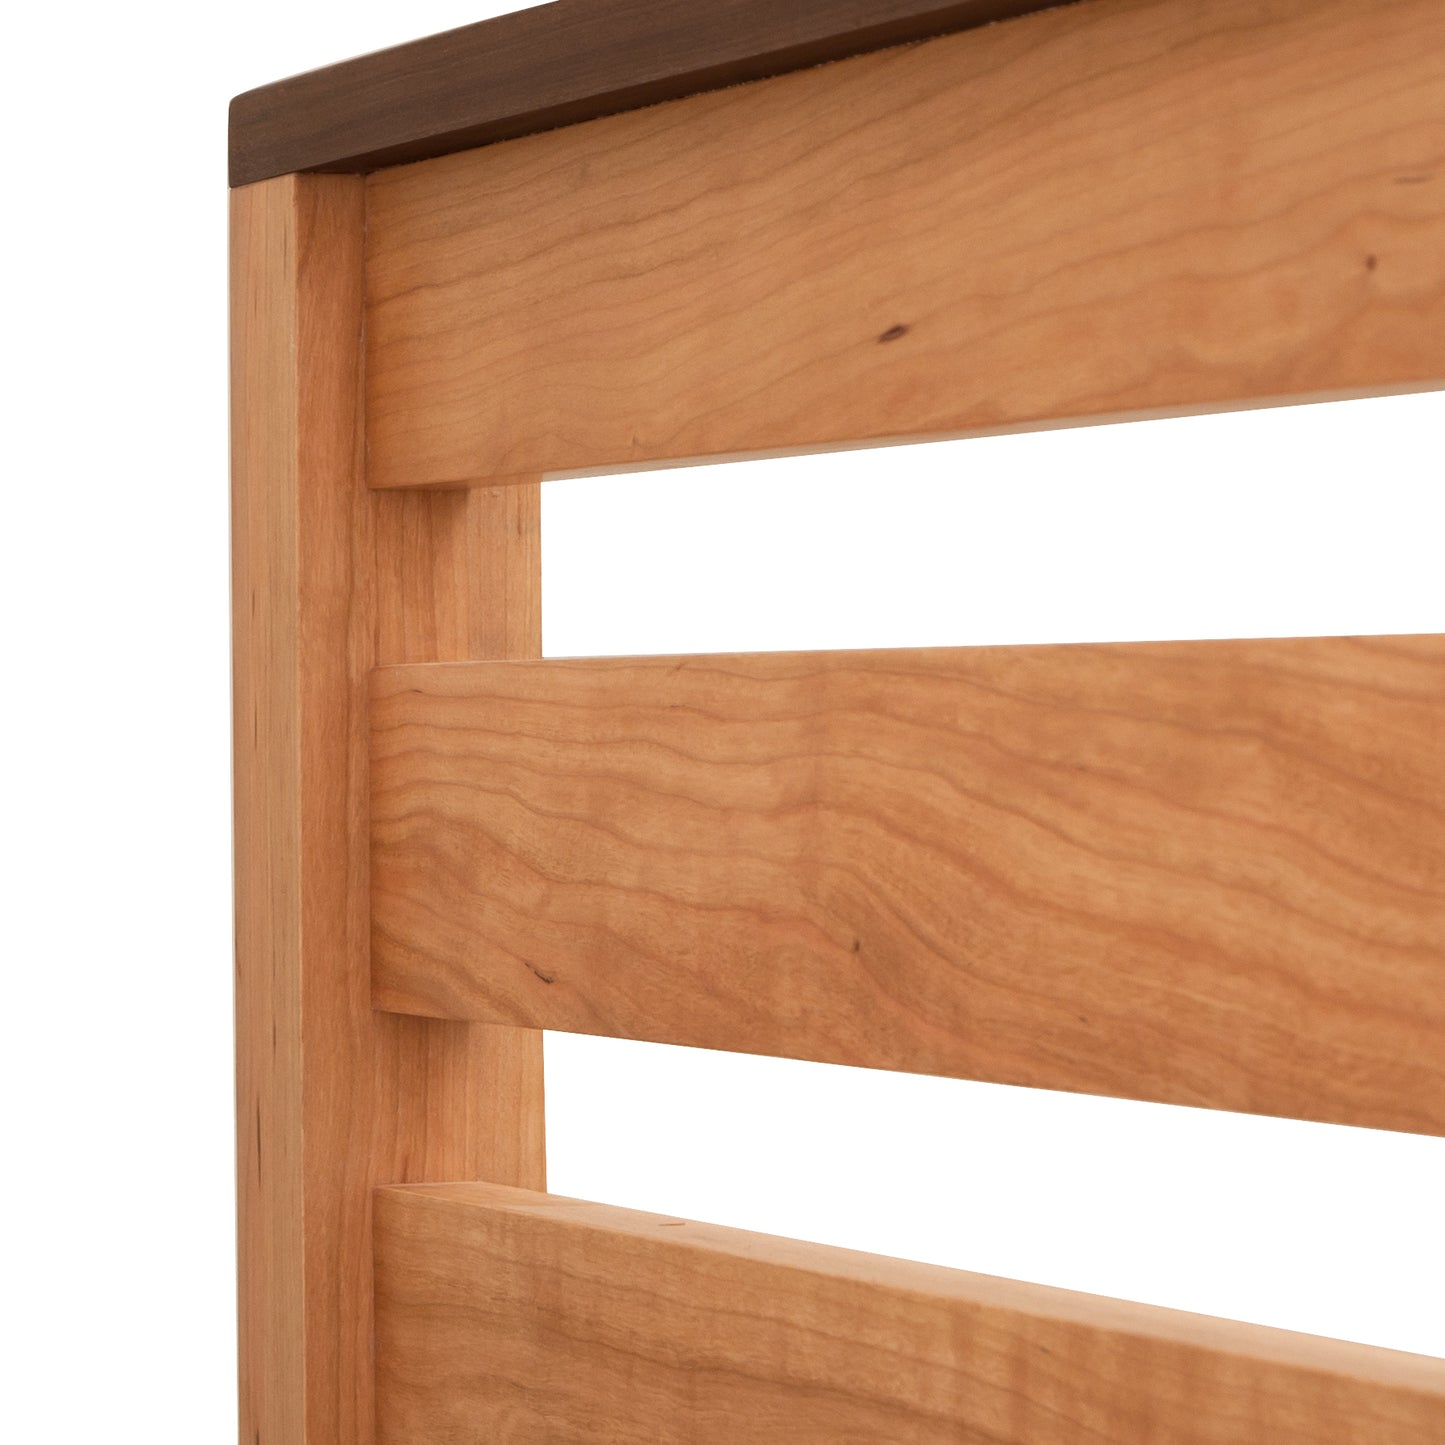 A close up of a Vermont Furniture Designs Skyline Panel Bed, featuring a natural eco-friendly hand-rubbed oil finish.